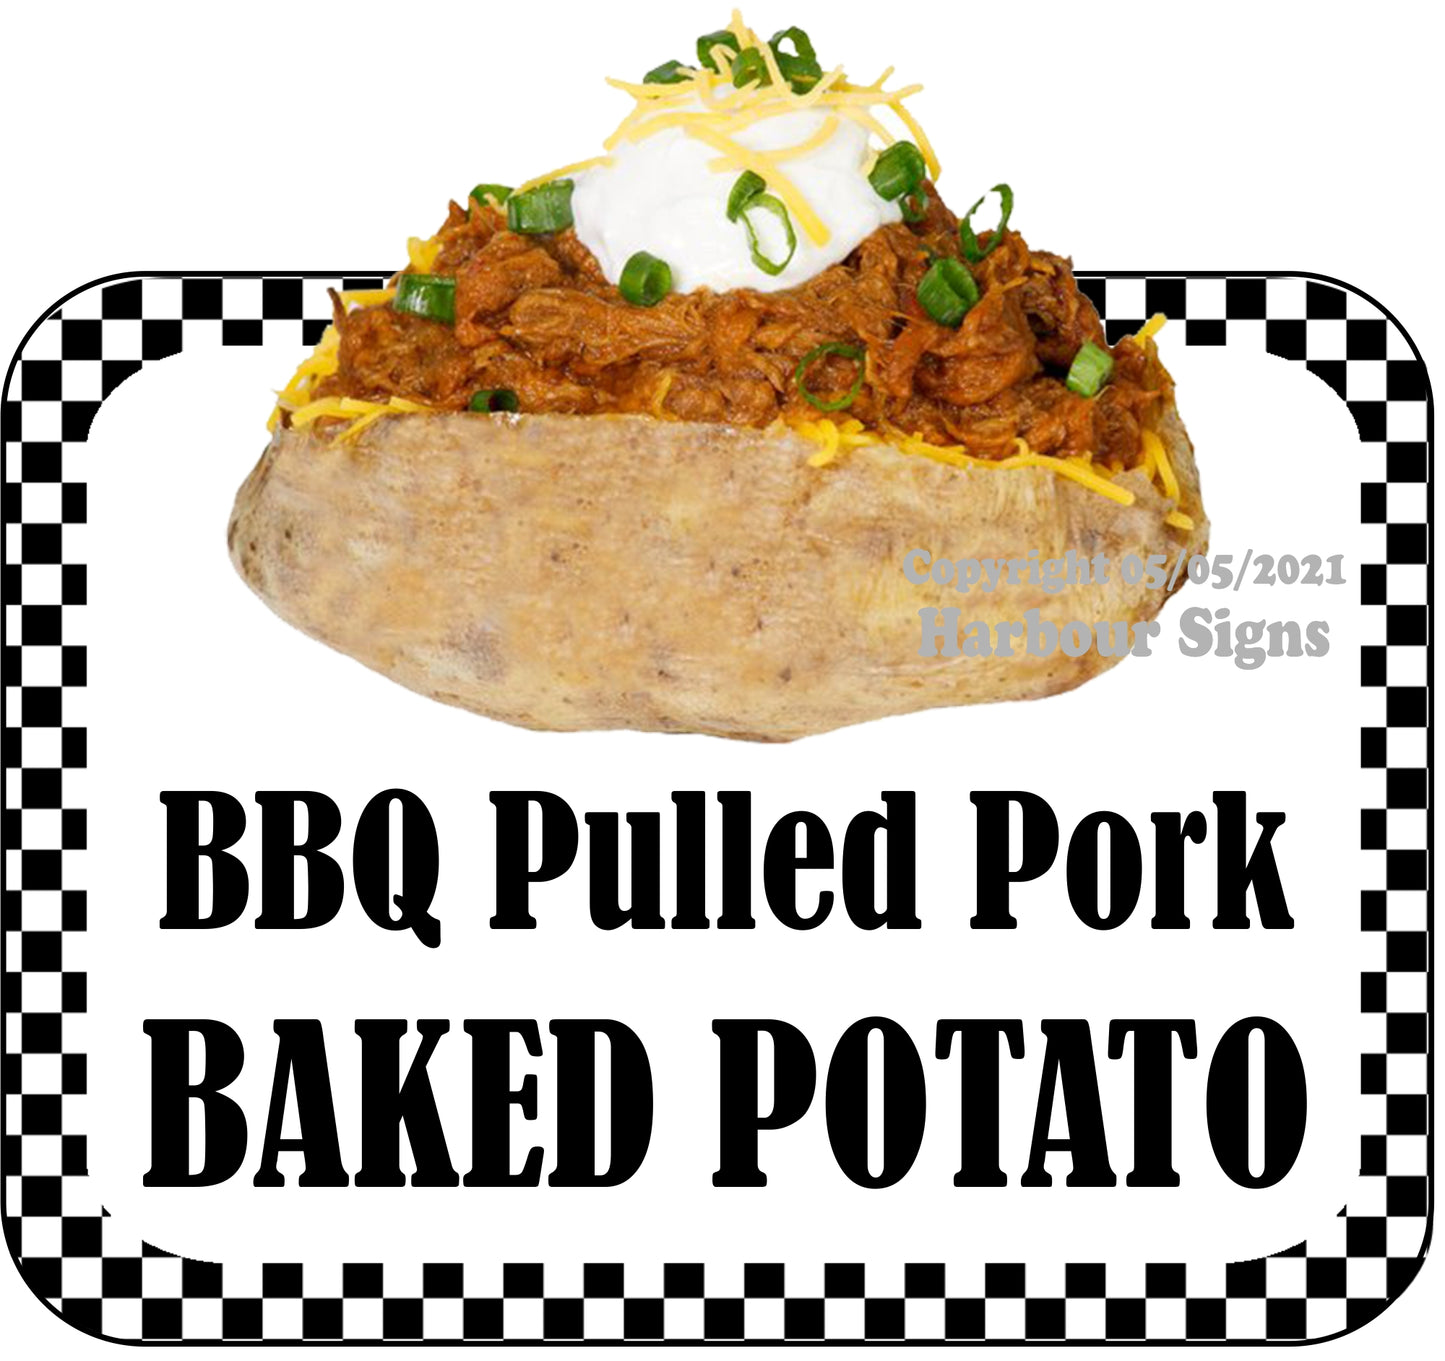 BBQ Pulled Pork Baked Potato Decal Food Truck Concession Vinyl Sticker bw